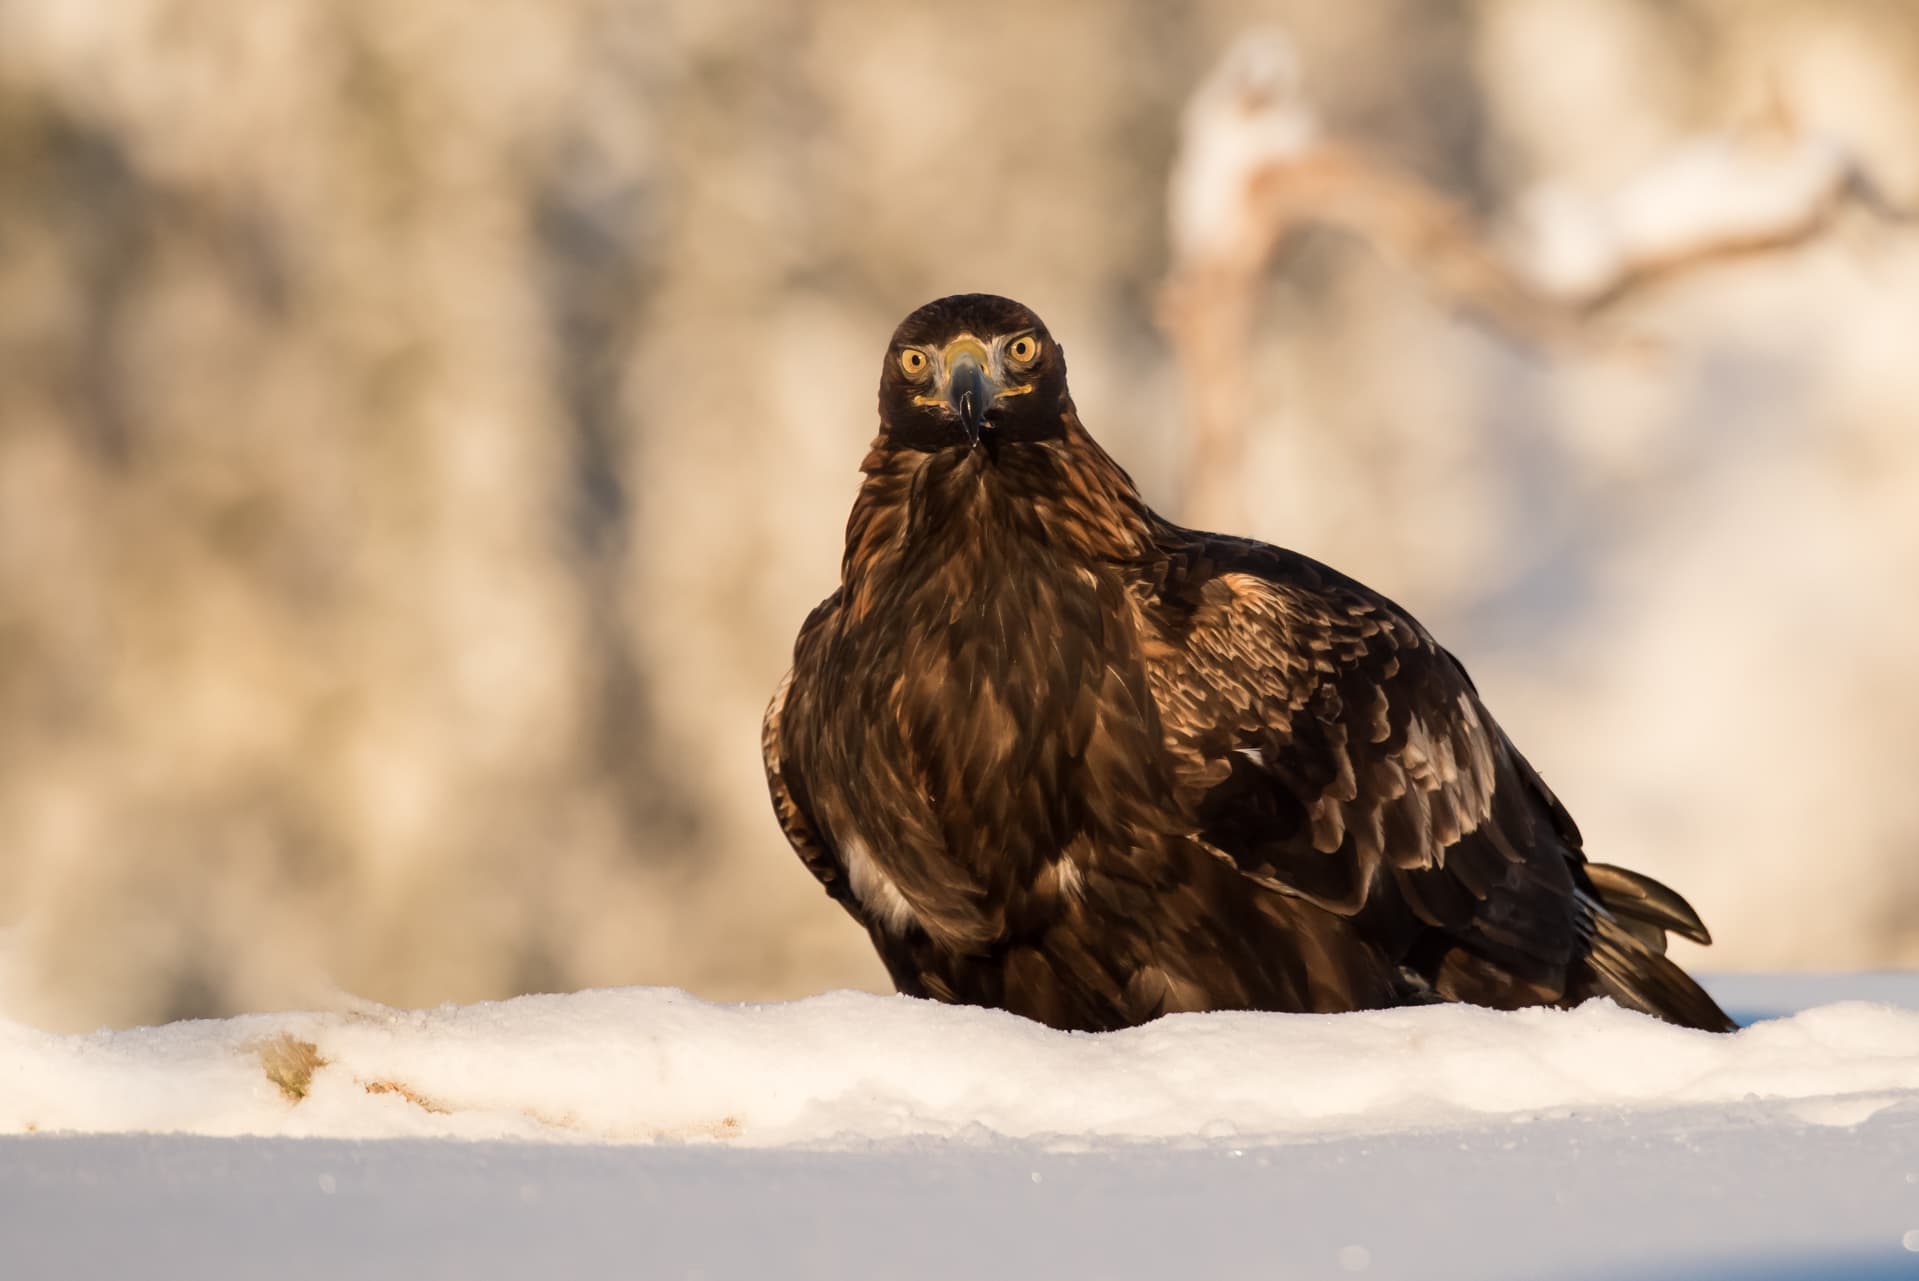 A lone Golden Eagle - one of the species photographed during the Winter Eagles of Norway photography holiday